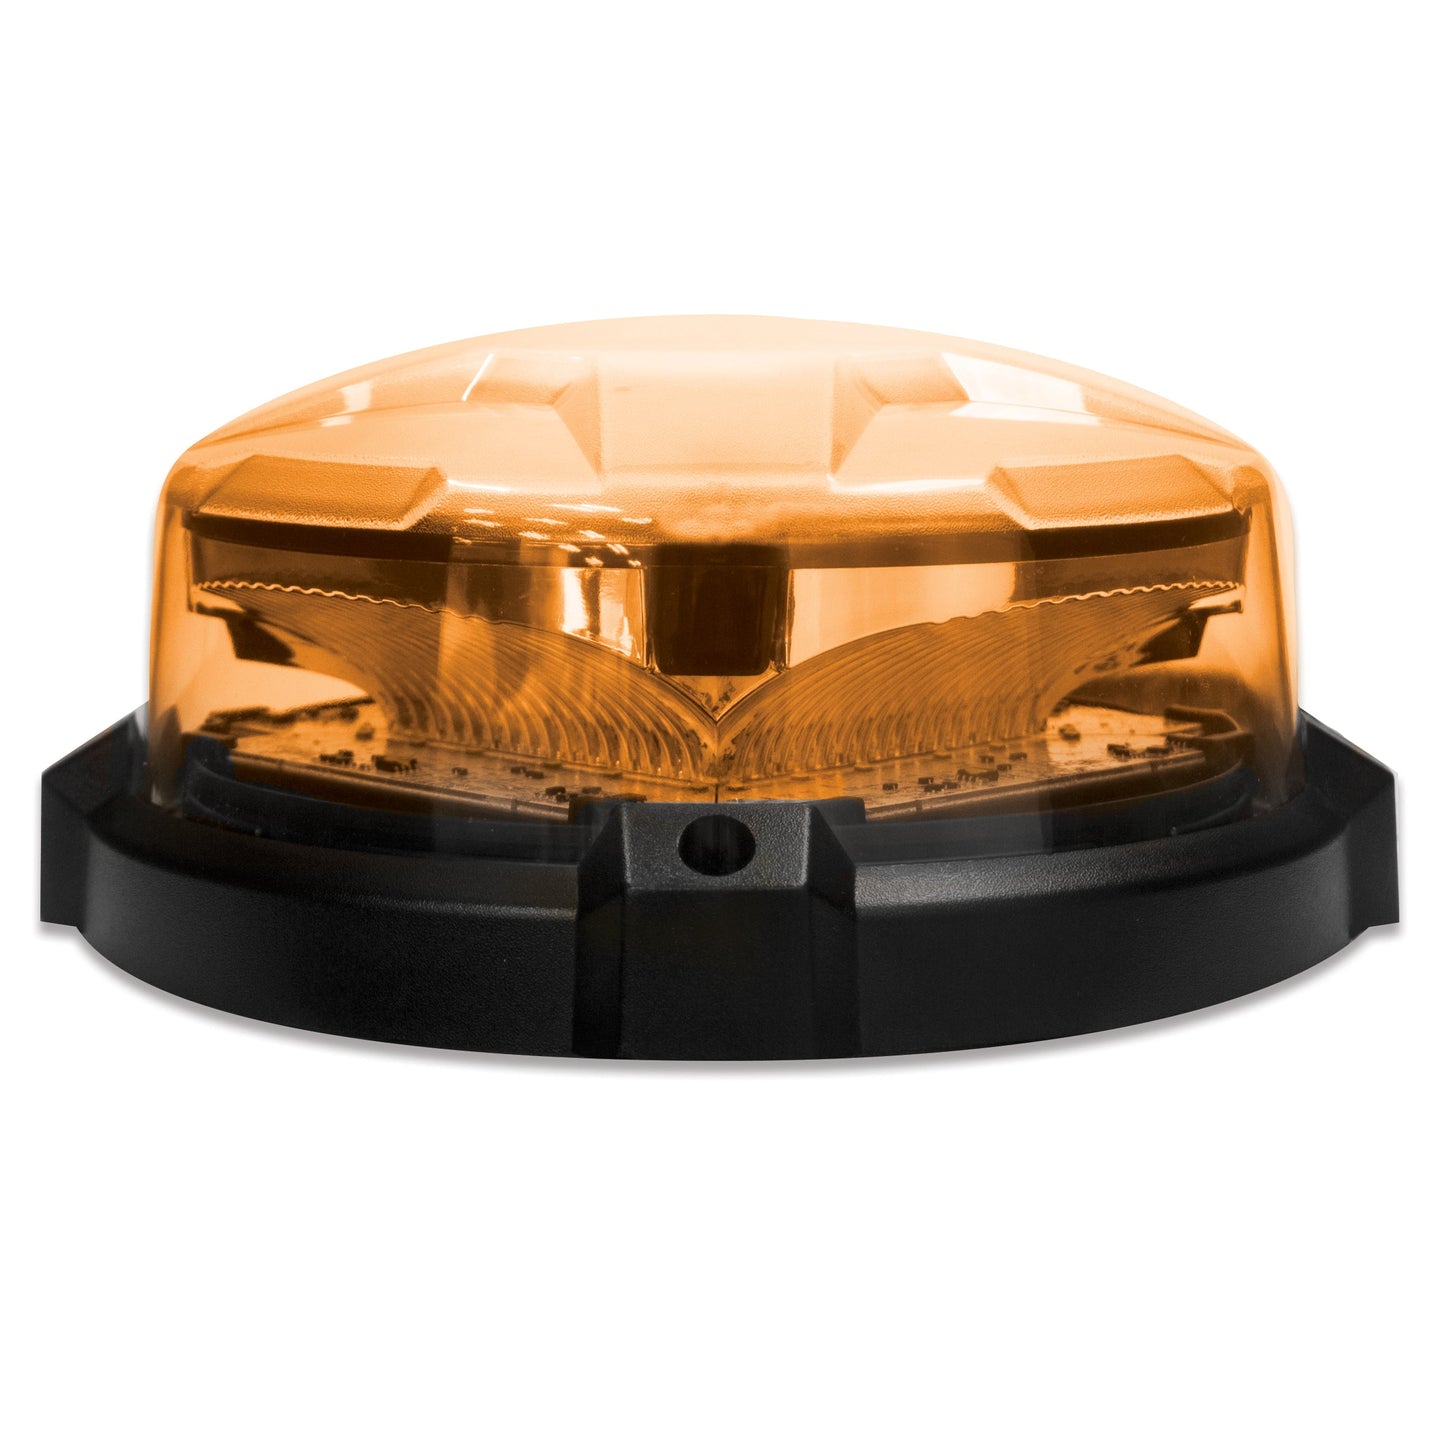 Soundoff Signal PNRBCLUP6A Replacement Upward Light Module For Nroads® Beacons - 6 Led Solid Color/Amber Leds